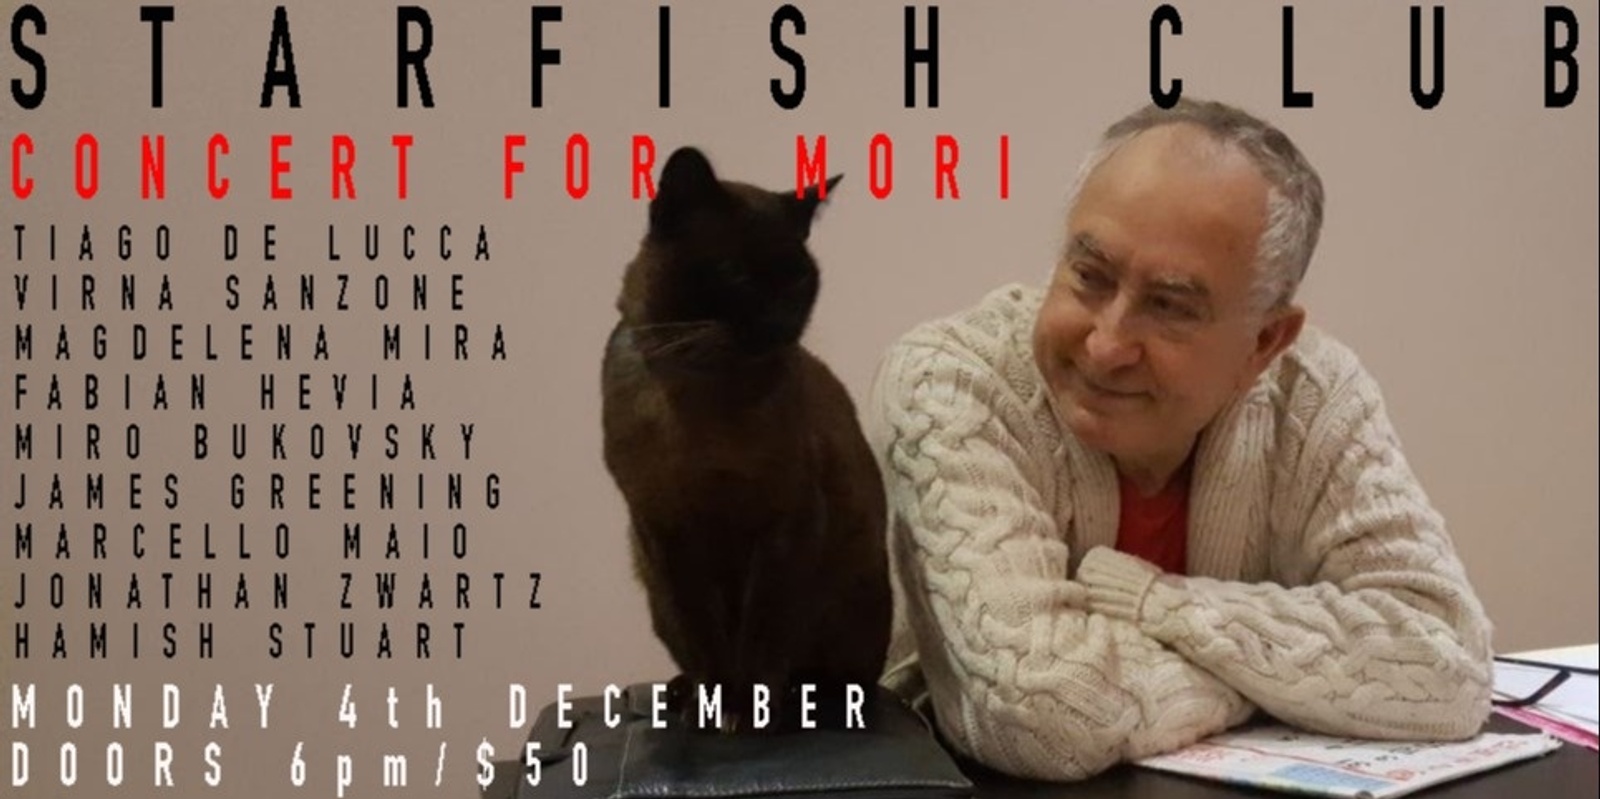 Banner image for Starfish Club Concert for Mori 4 December 2023